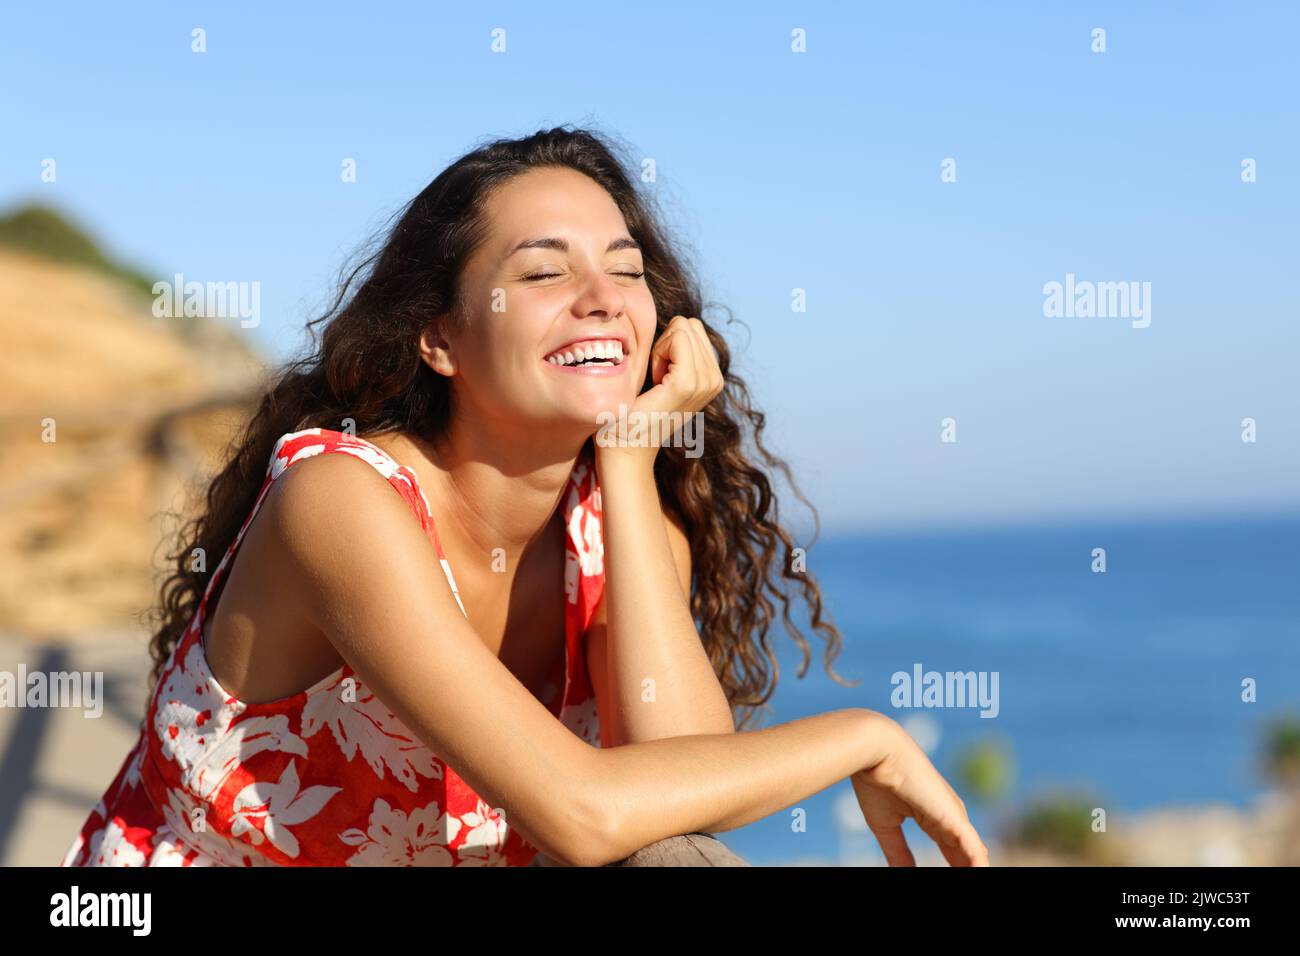 Happy woman in red dress laughing on the beach Stock Photo